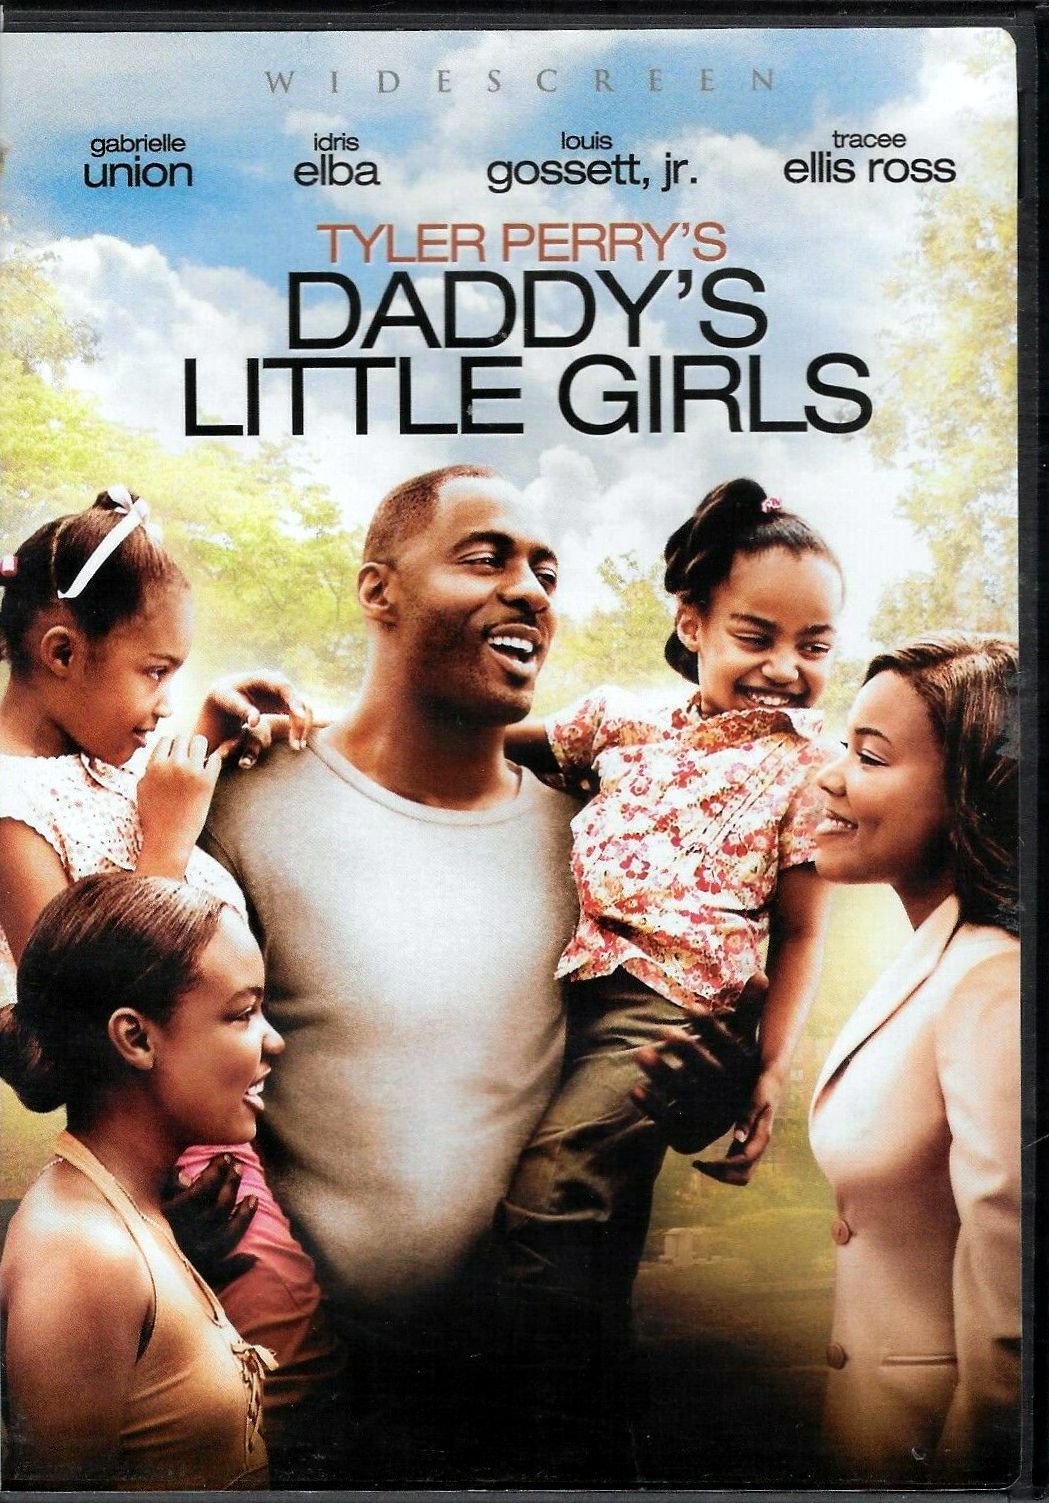 Daddys Little Girls DVD (Widescreen) (Free Shipping) image